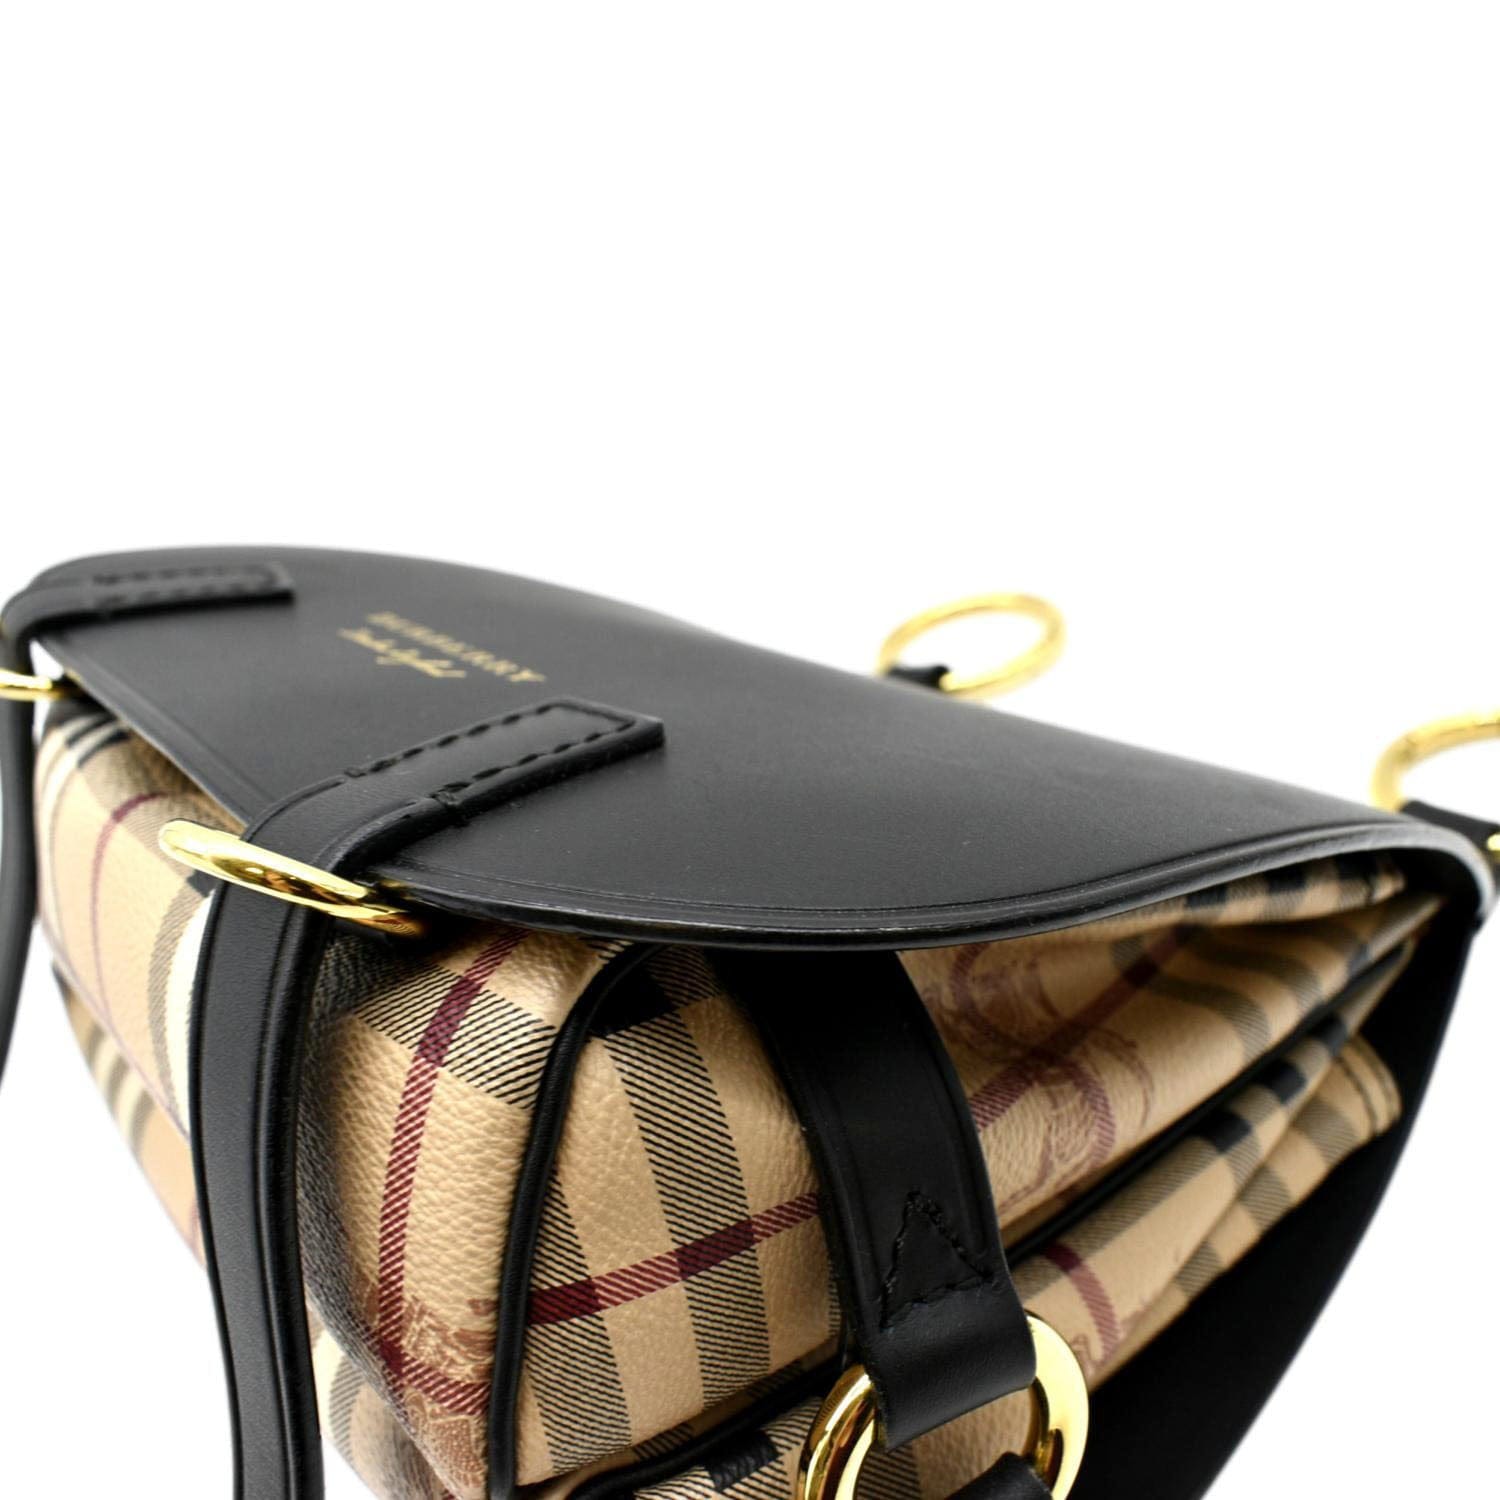 Burberry The Bridle Bag In Leather And Haymarket Check Dark Clove Brown